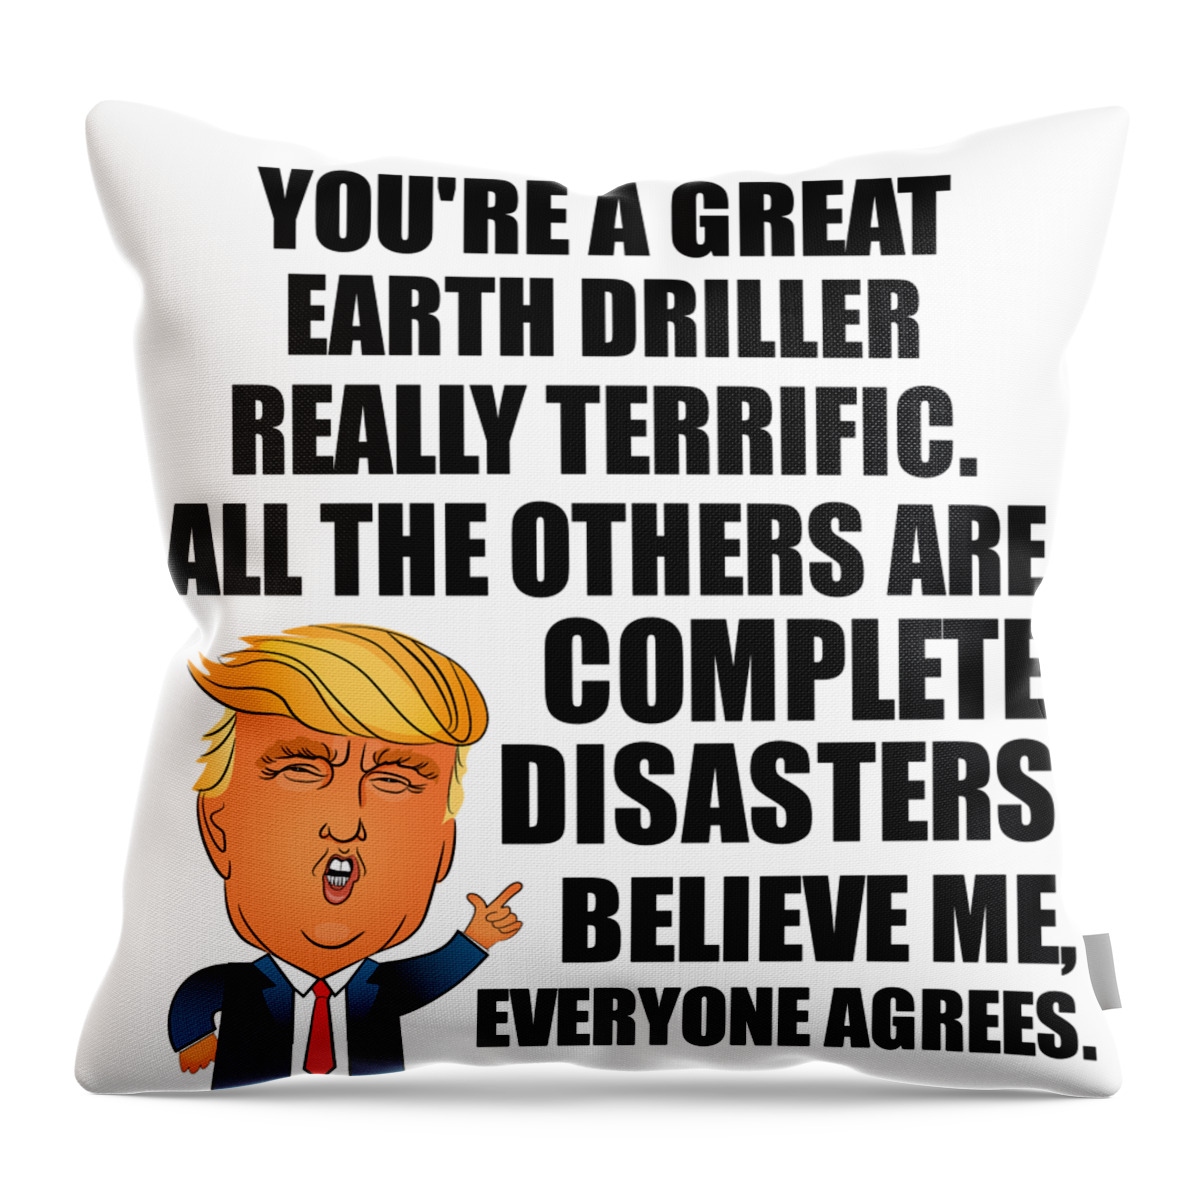 Earth Driller Throw Pillow featuring the digital art Trump Earth Driller Funny Gift for Earth Driller Coworker Gag Great Terrific President Fan Potus Quote Office Joke by Jeff Creation